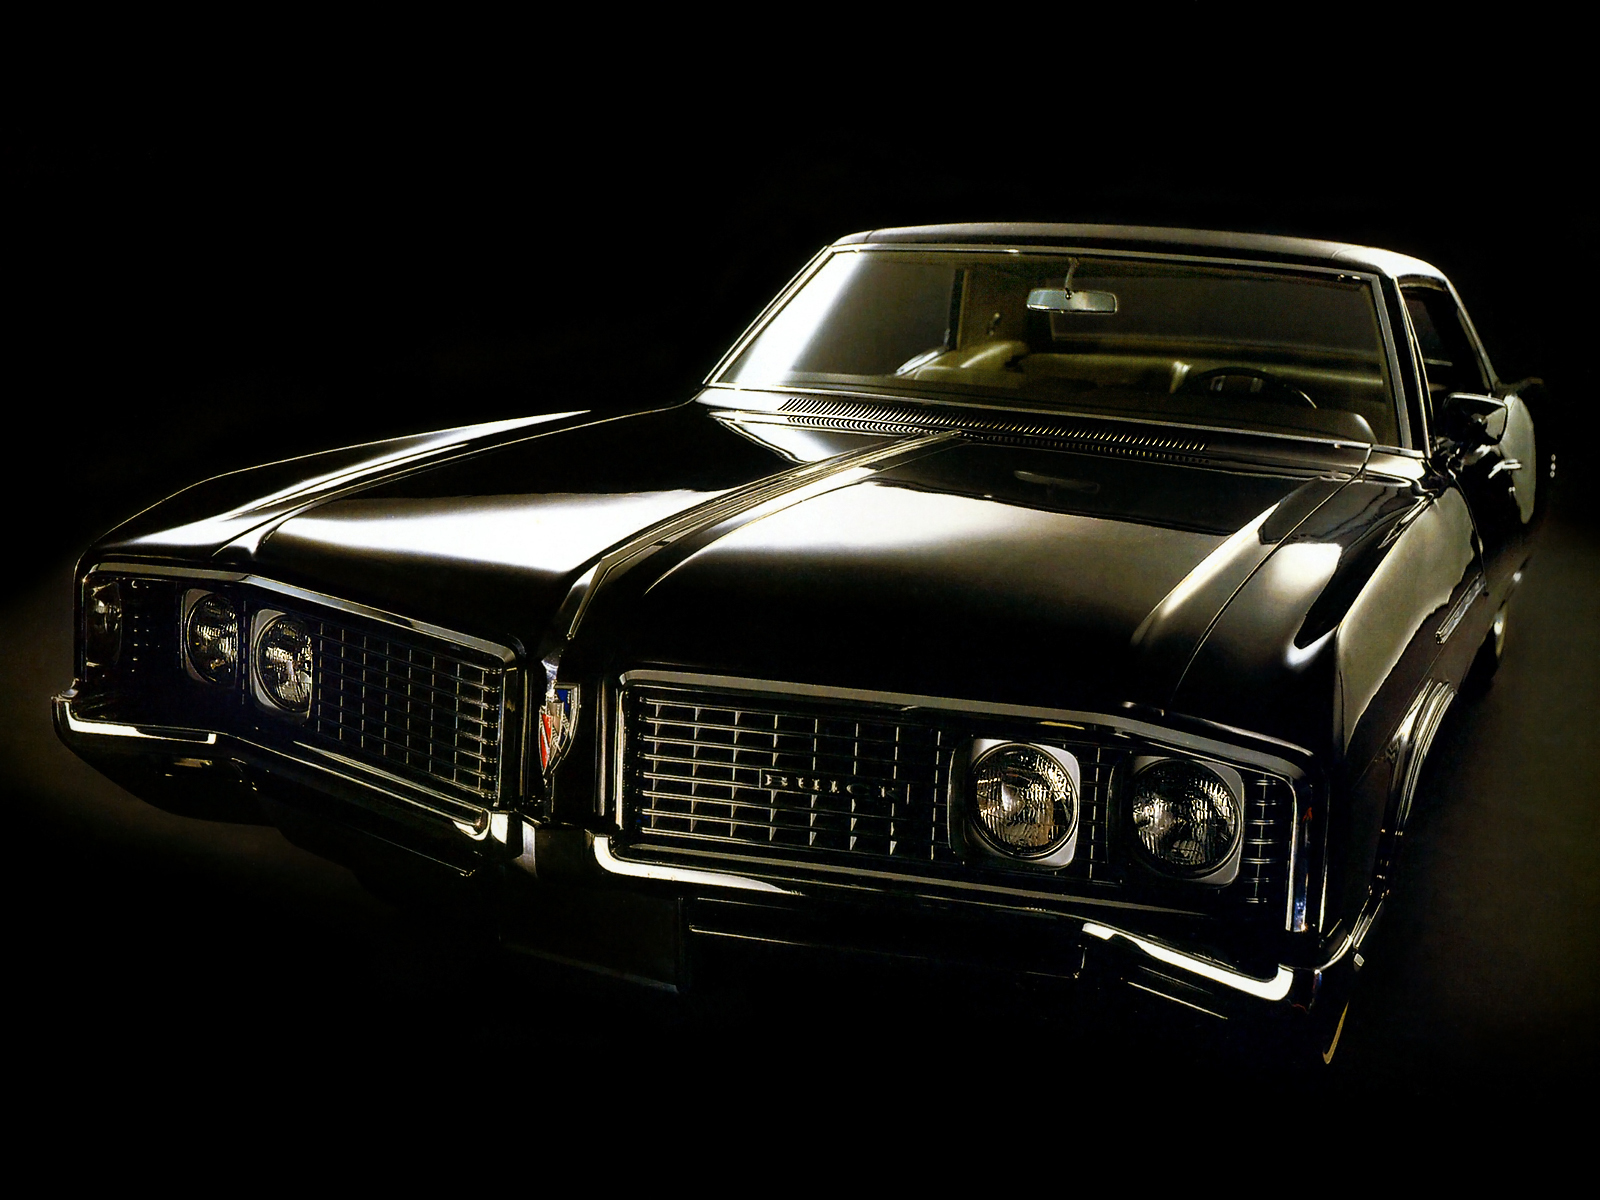 1968, Buick, Electra, 225, Hardtop, Coupe, 48257, Classic Wallpaper